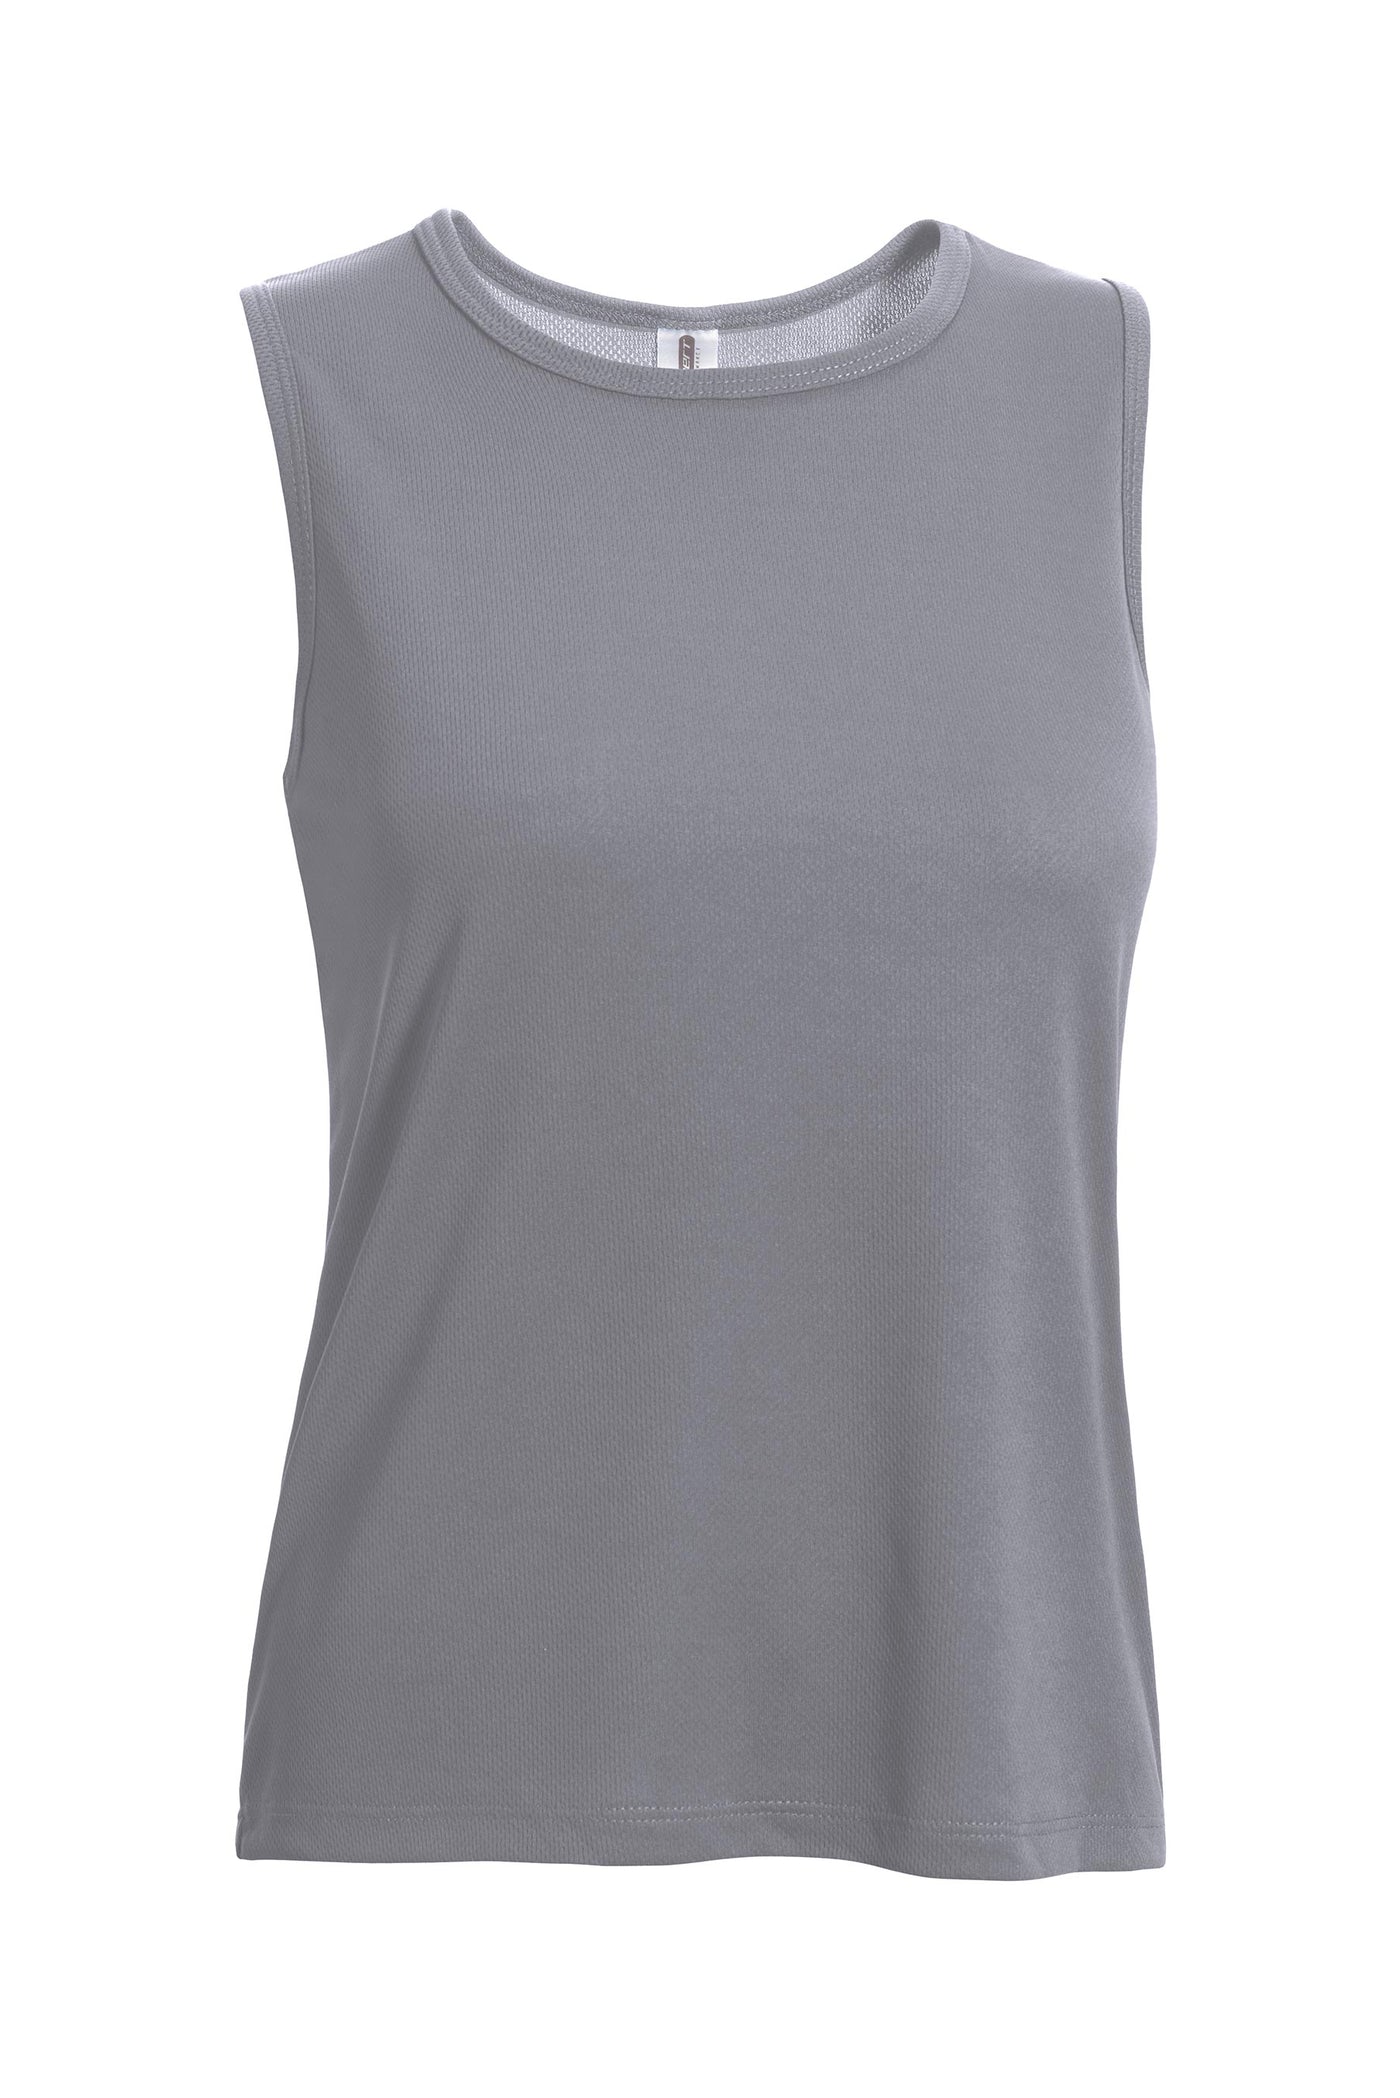 Expert Brand Retail Women's Oxymesh™ Sleeveless Tank Royal Blue Made in USA steel#color_steel